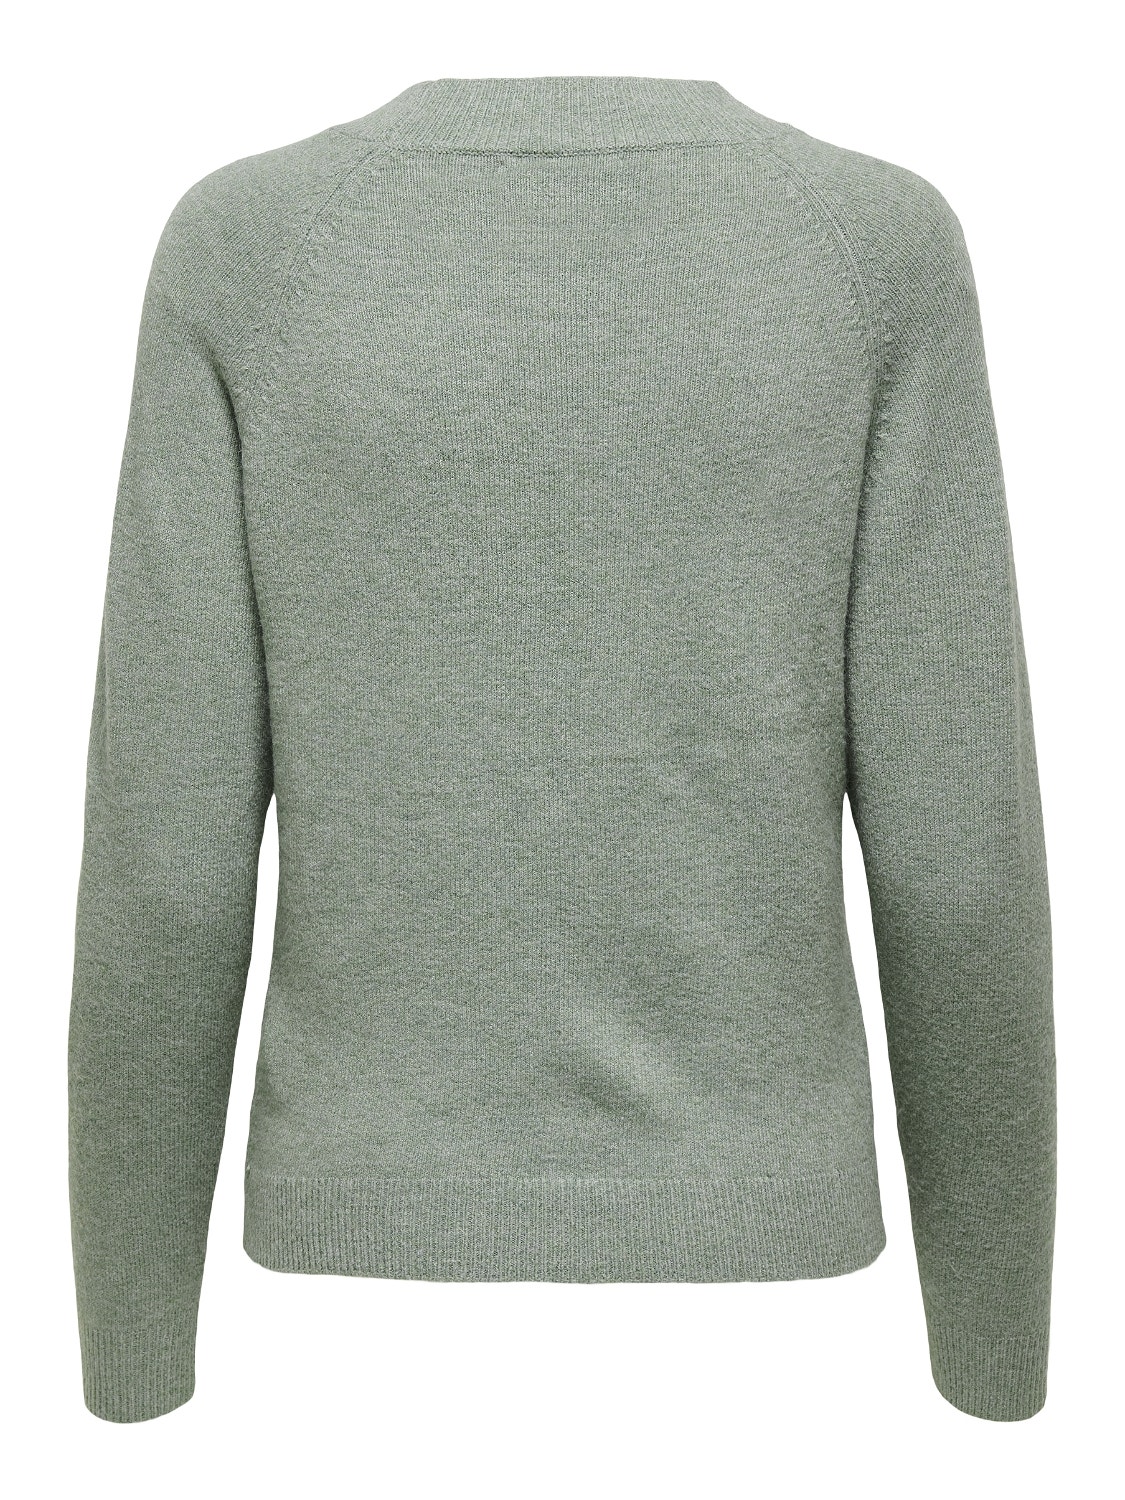 ONLY Round Neck Ribbed cuffs Pullover -Chinois Green - 15204279